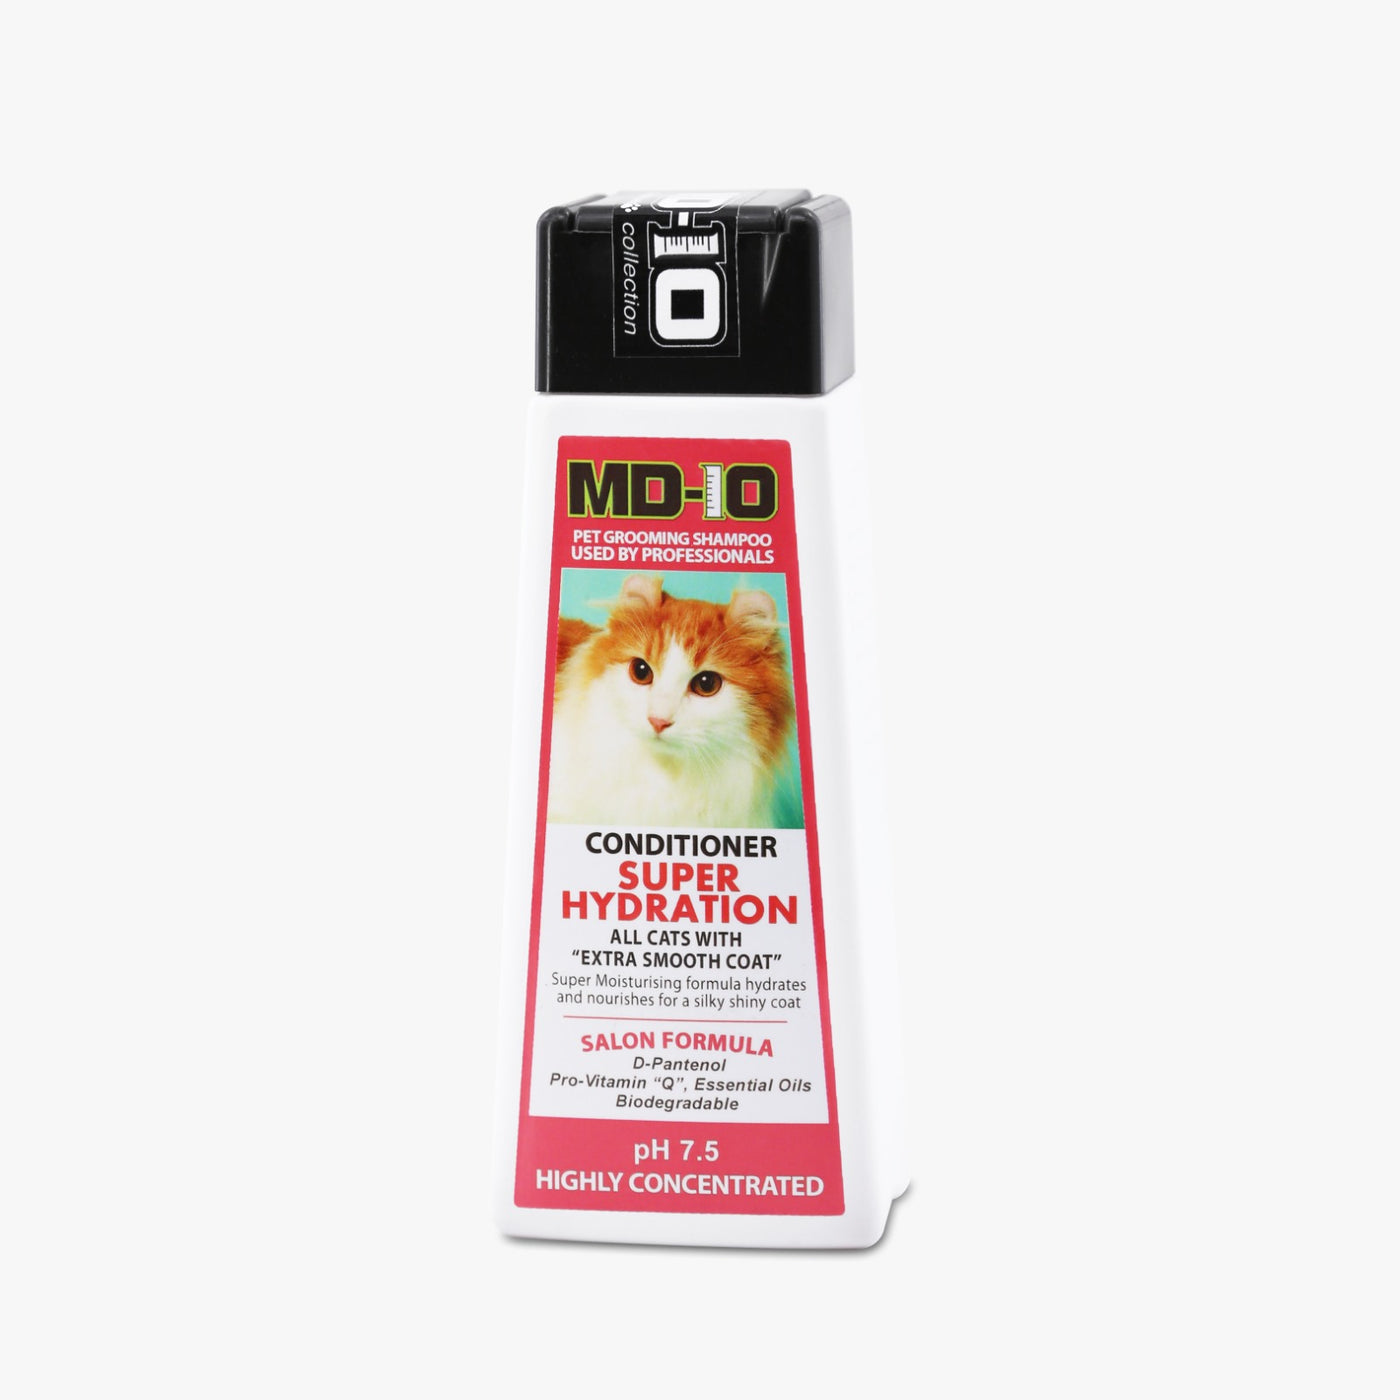 MD-10 Professional Grooming- Super Hydration Conditioner 300ml (For Cat)